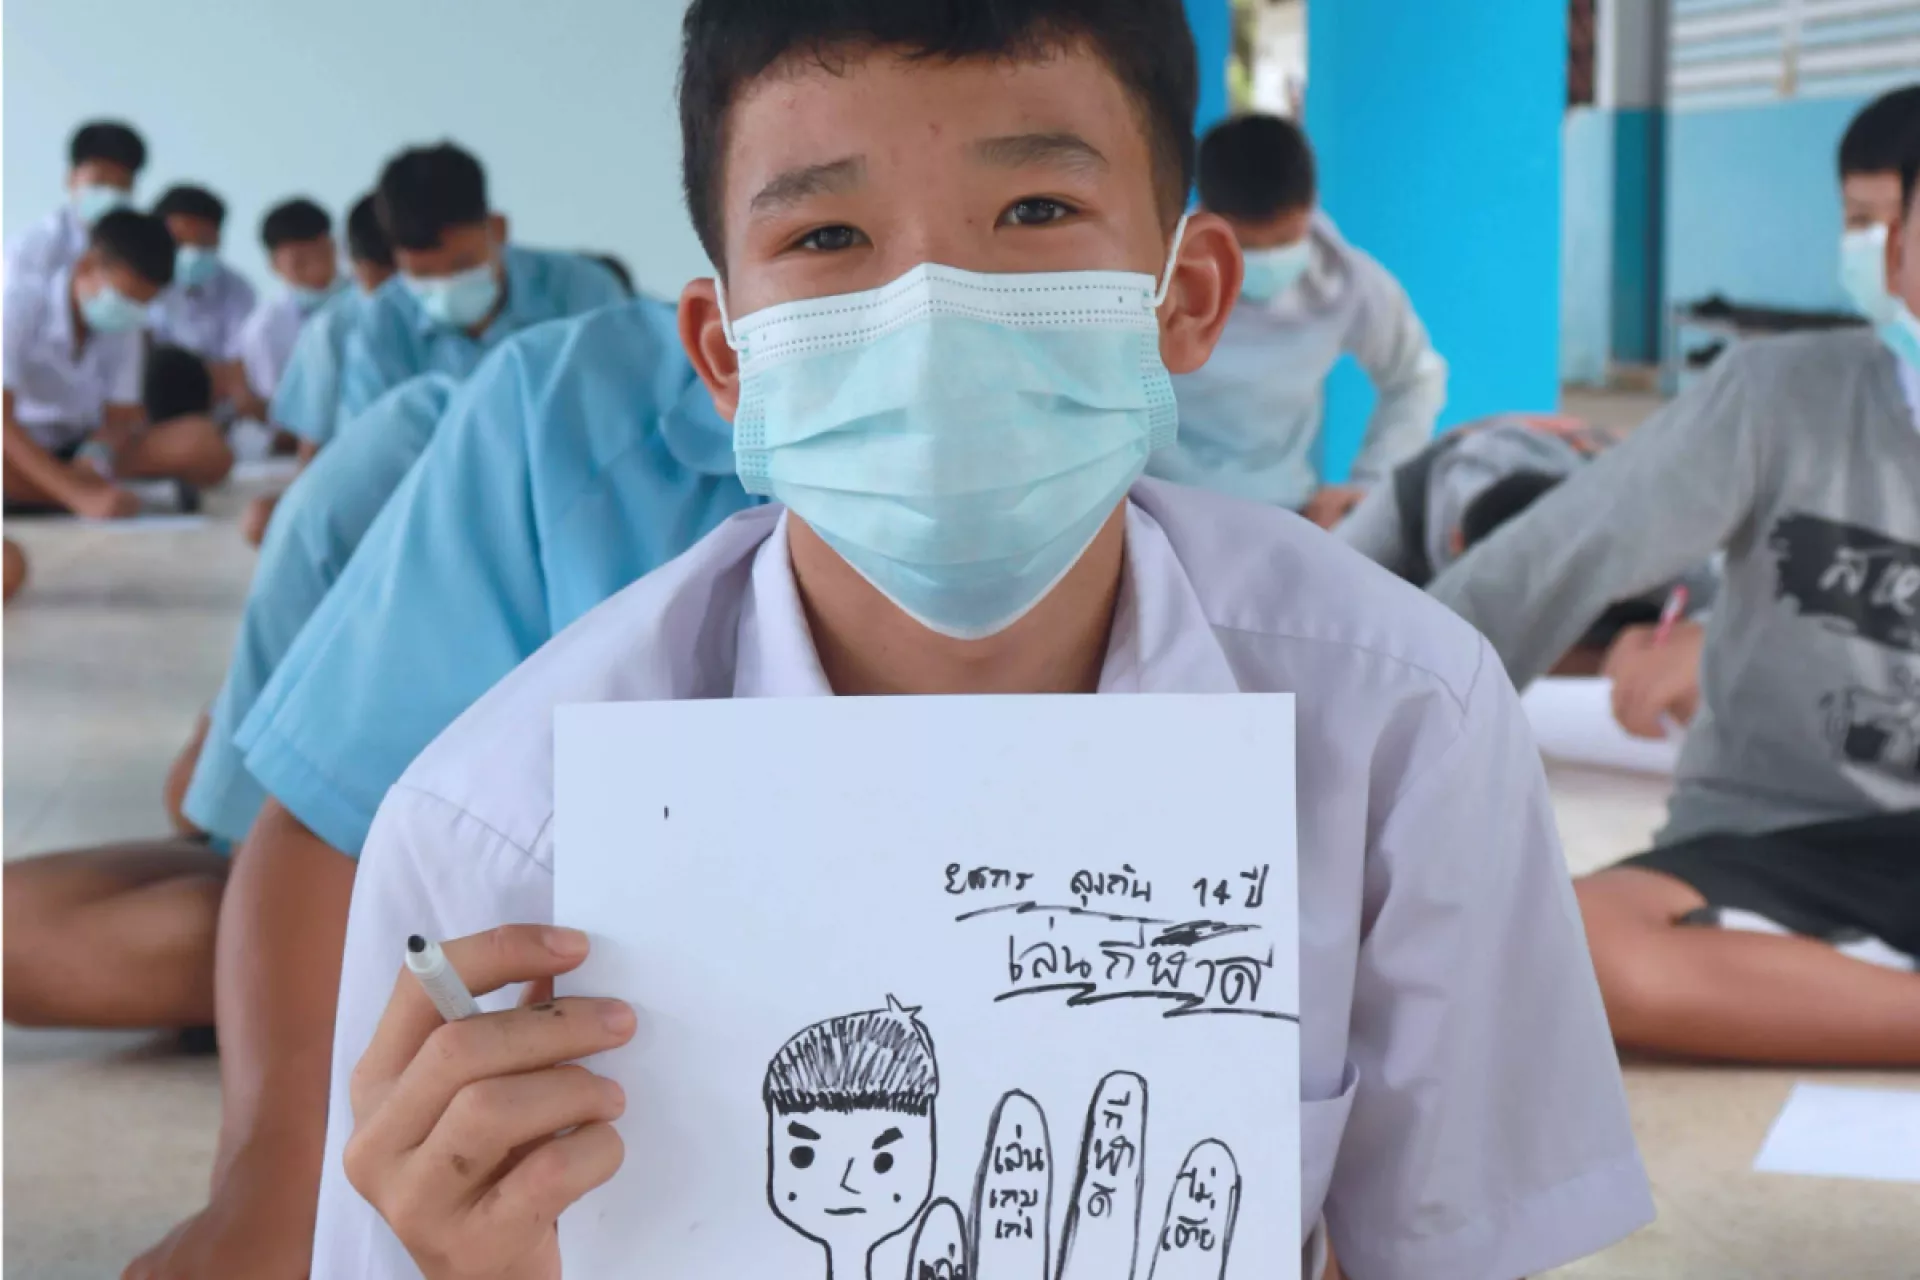  A student wearing a face mask is showing his drawing.